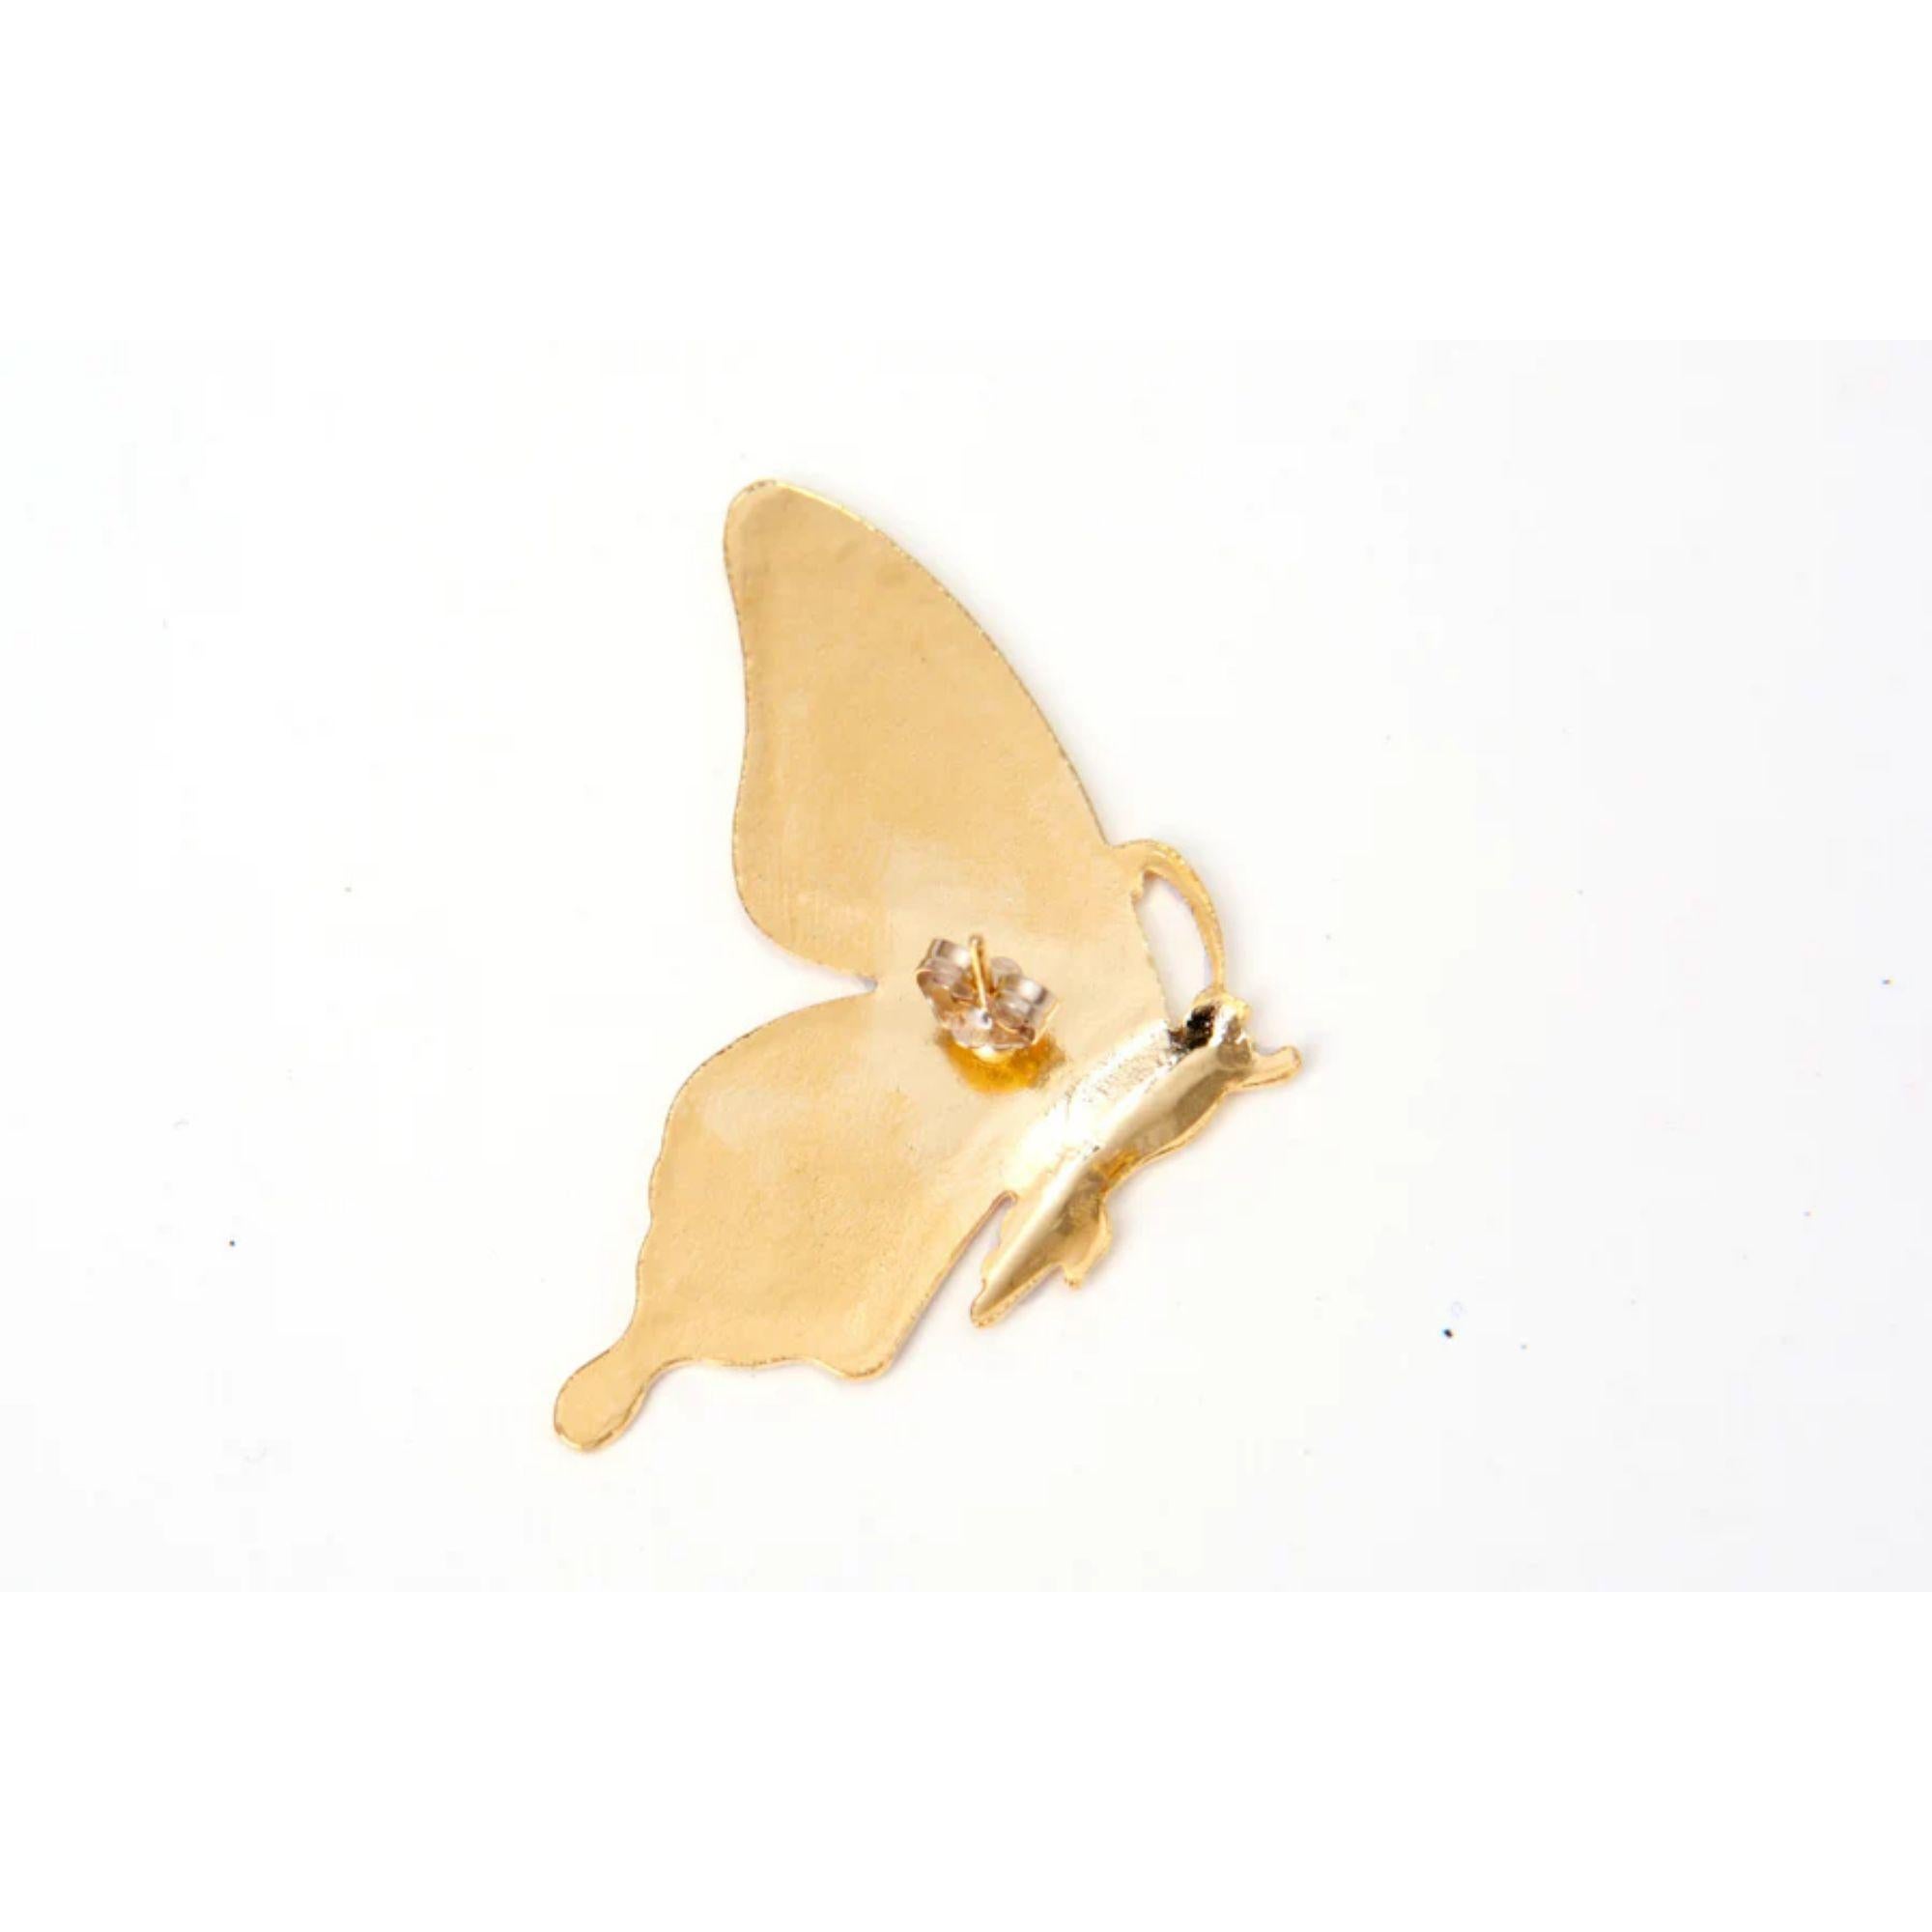 Single butterwing earring so your ear can flourish out of the cocoon. Match with butterwing ring. Made in LA. 24k gold plated over brass.

Additional Information:
Material: 24K Gold, Brass
Dimensions: W 0.5 x L 1.5 in